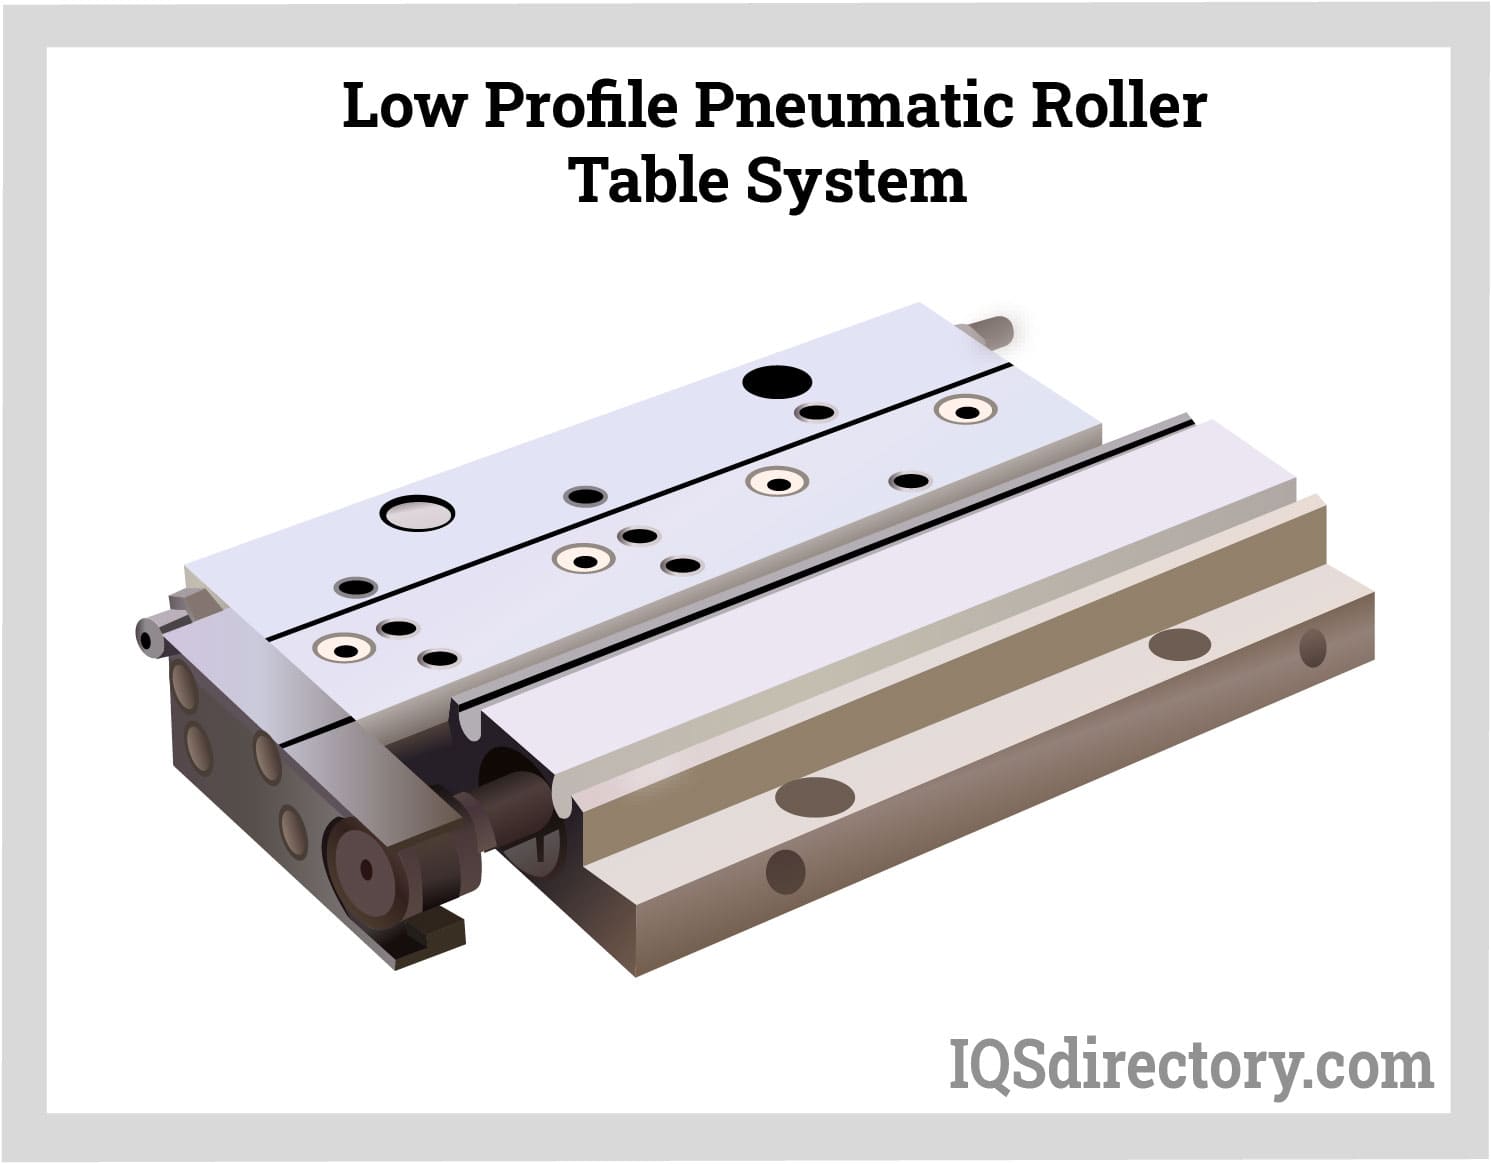 Low Profile Pneumatic Roller Table System